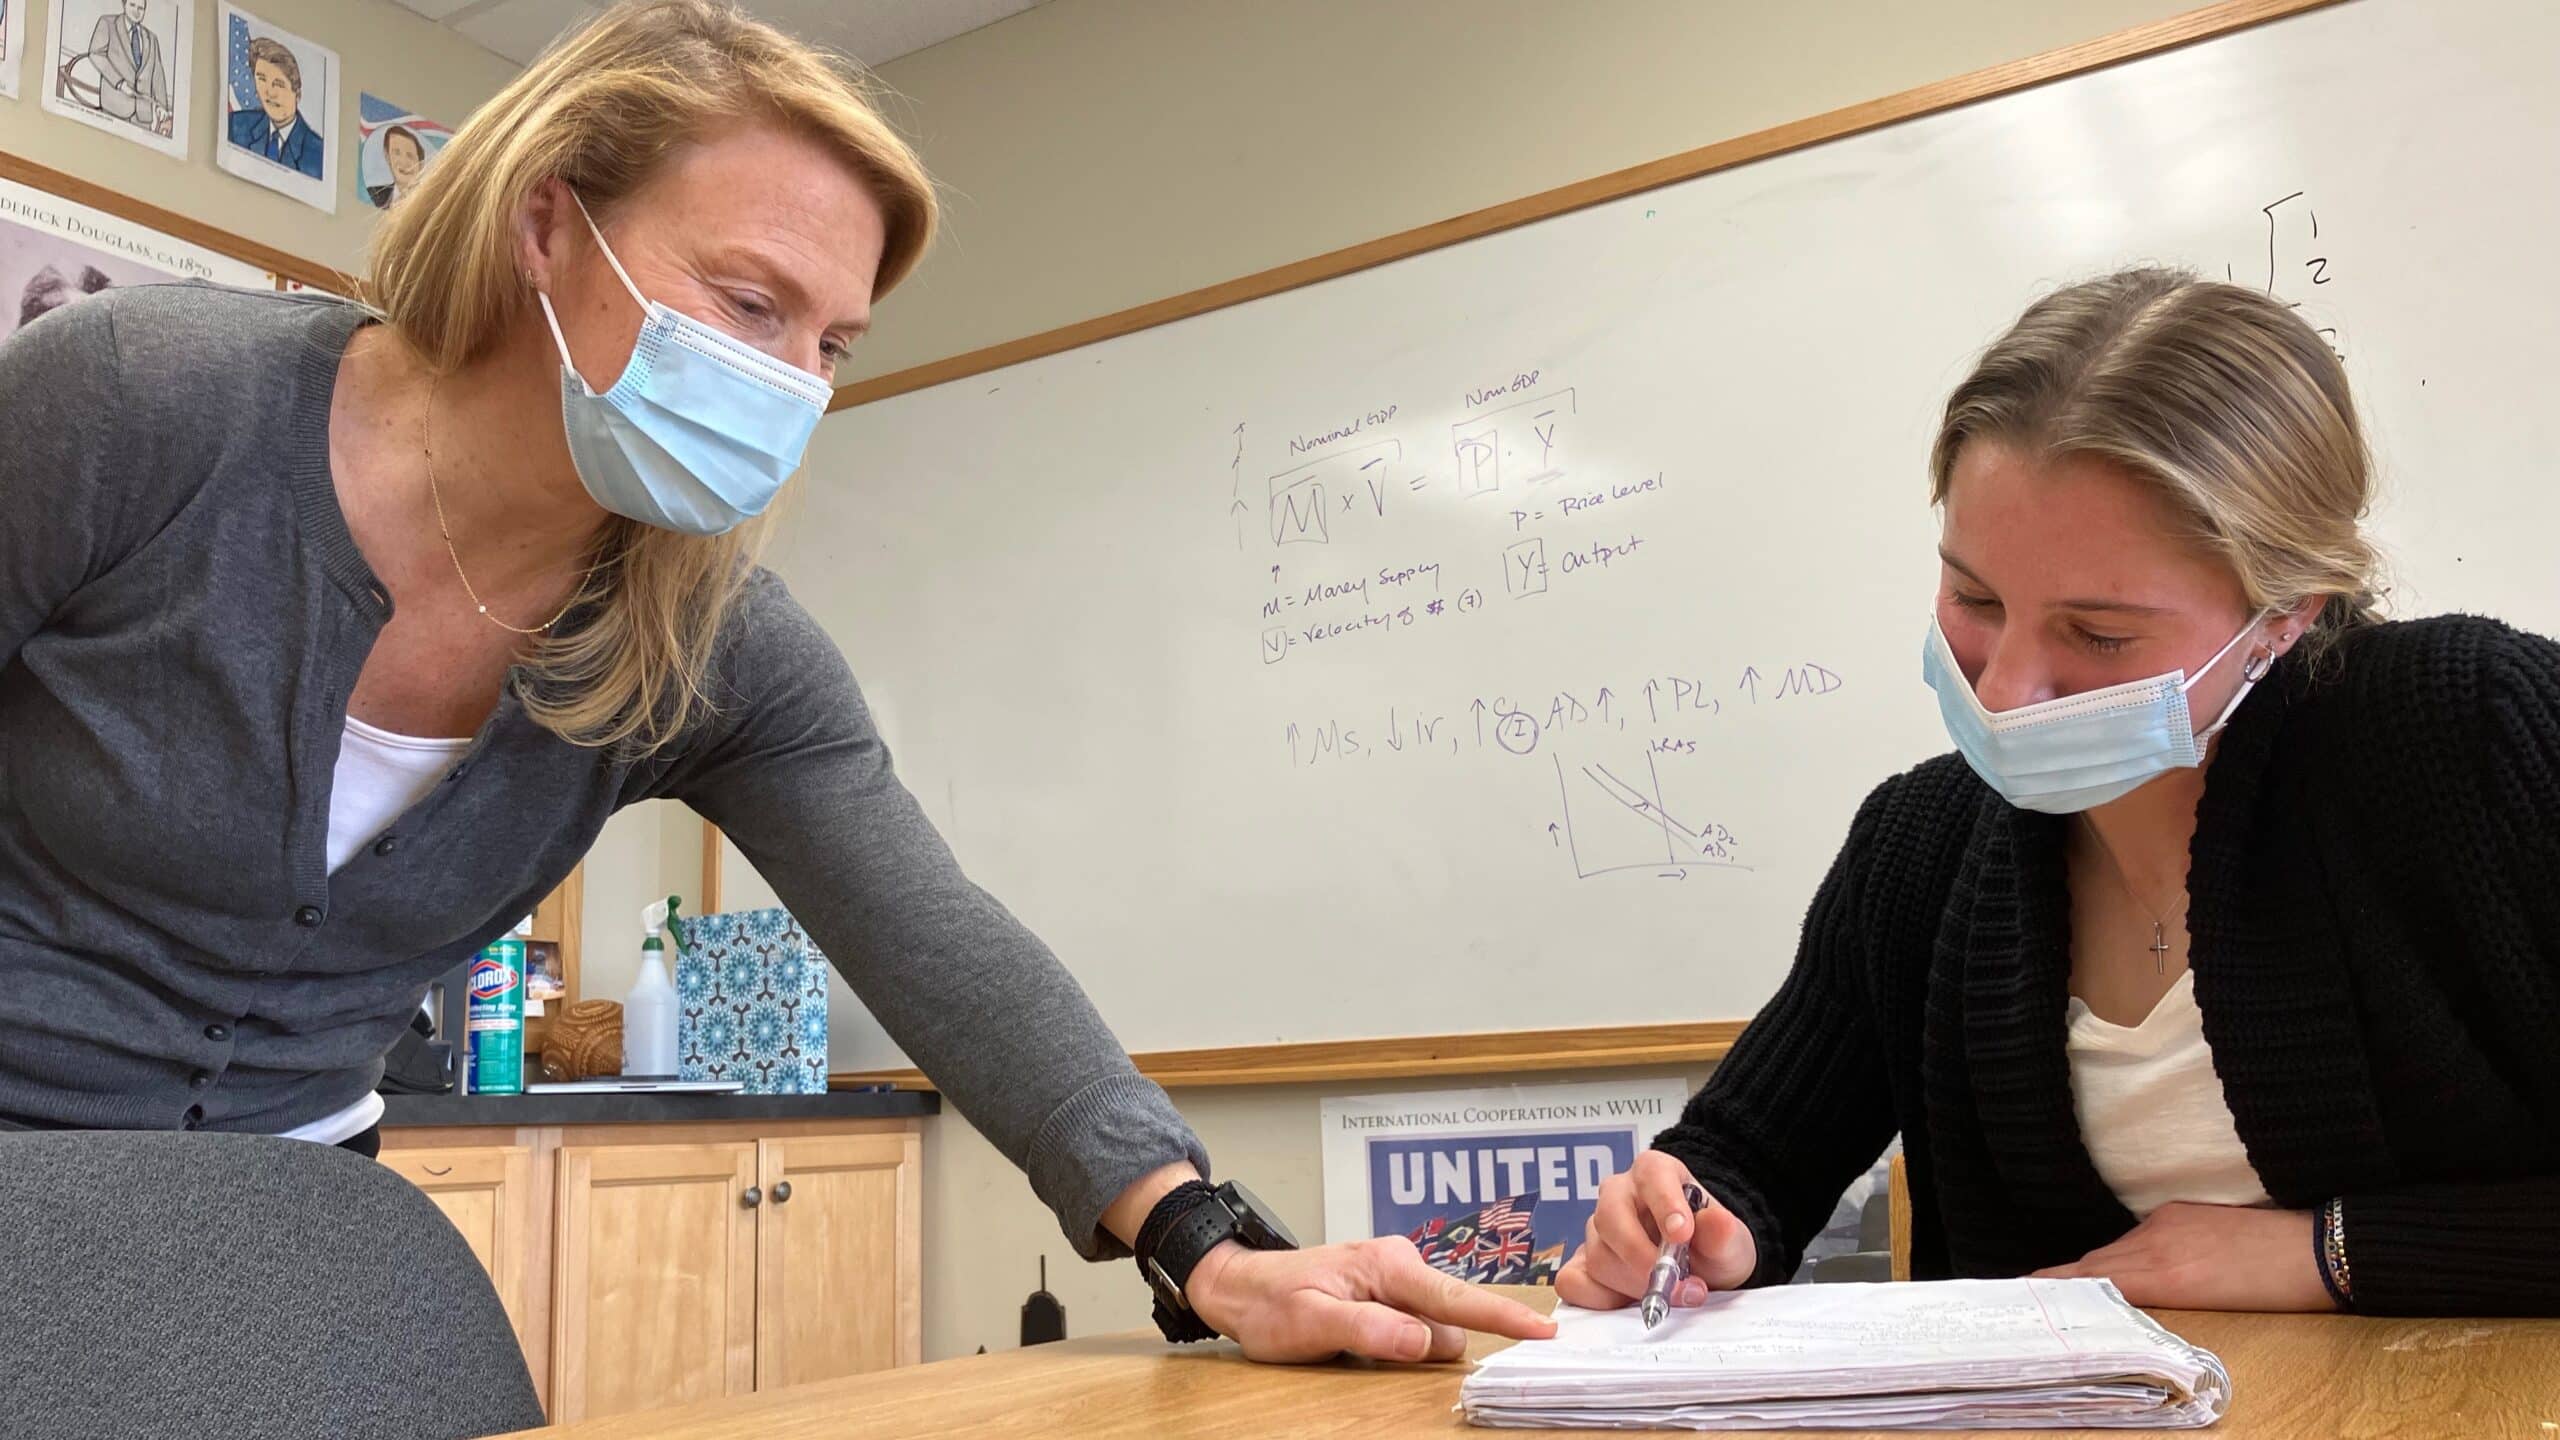 Masked and distanced, Lindsay McConnel helps a high-school student at the Tatnall School.